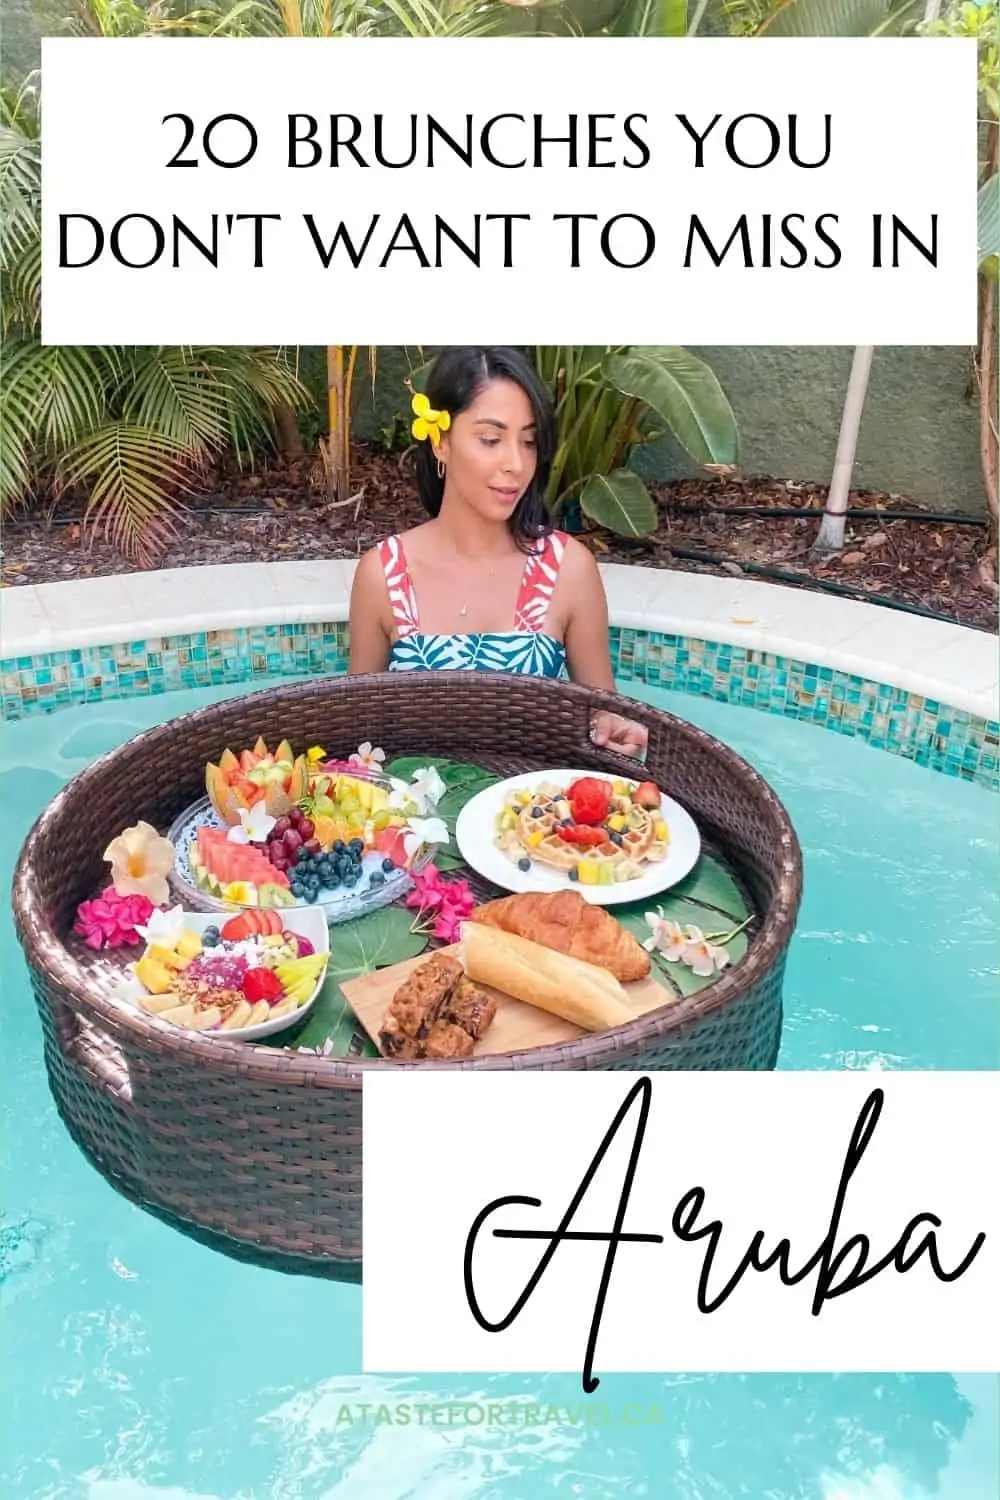 Pin with "20 brunches you don't want to miss in Aruba"